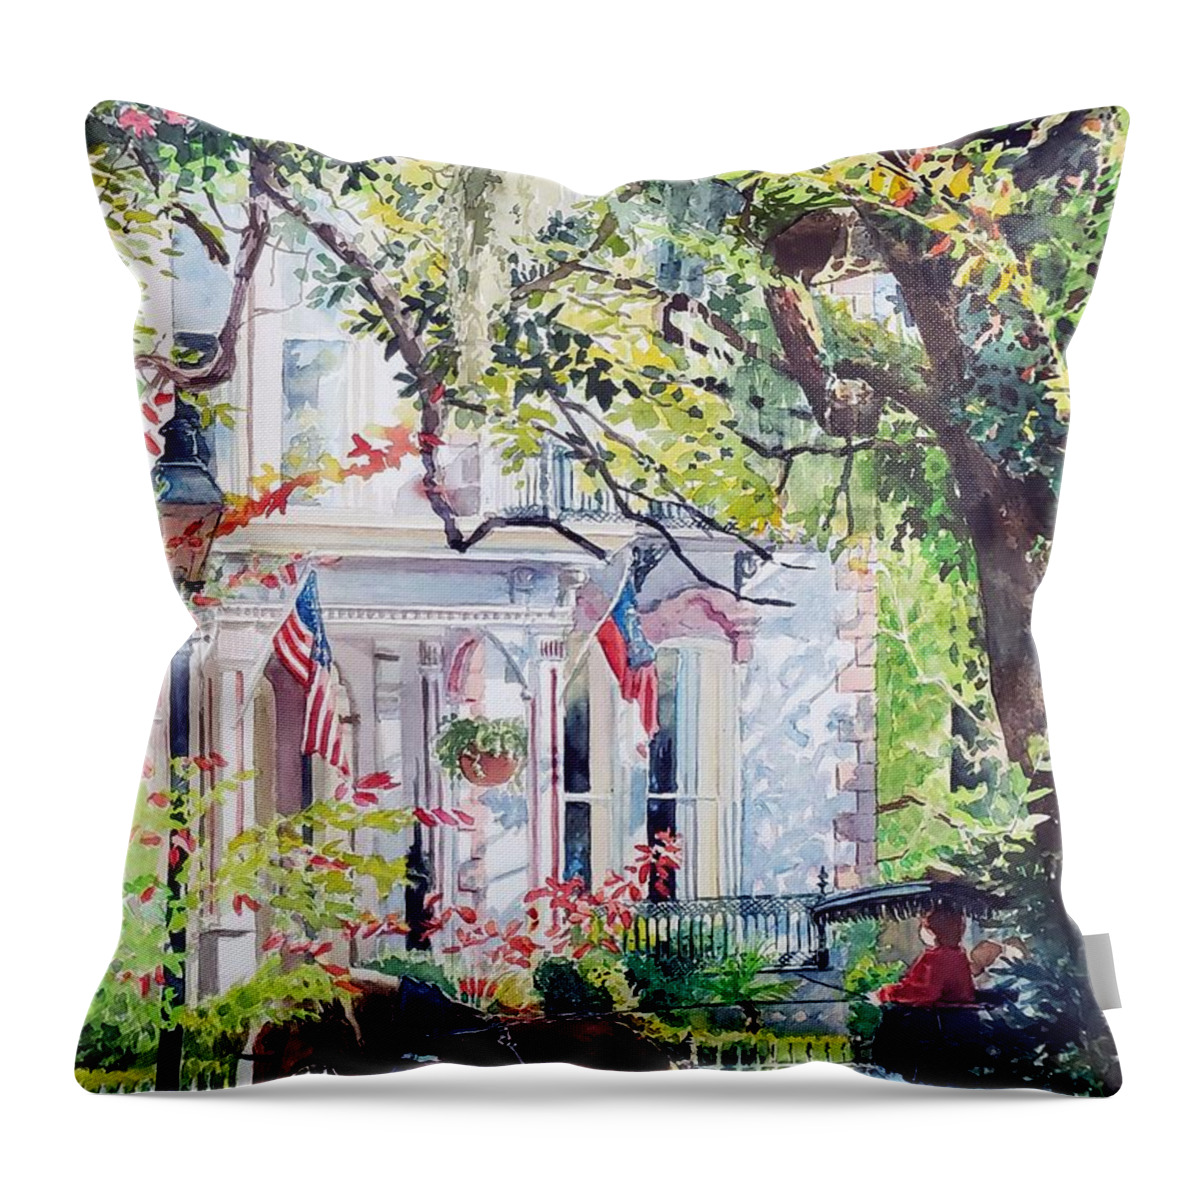 Carriage Throw Pillow featuring the painting Carriage Ride by Merana Cadorette